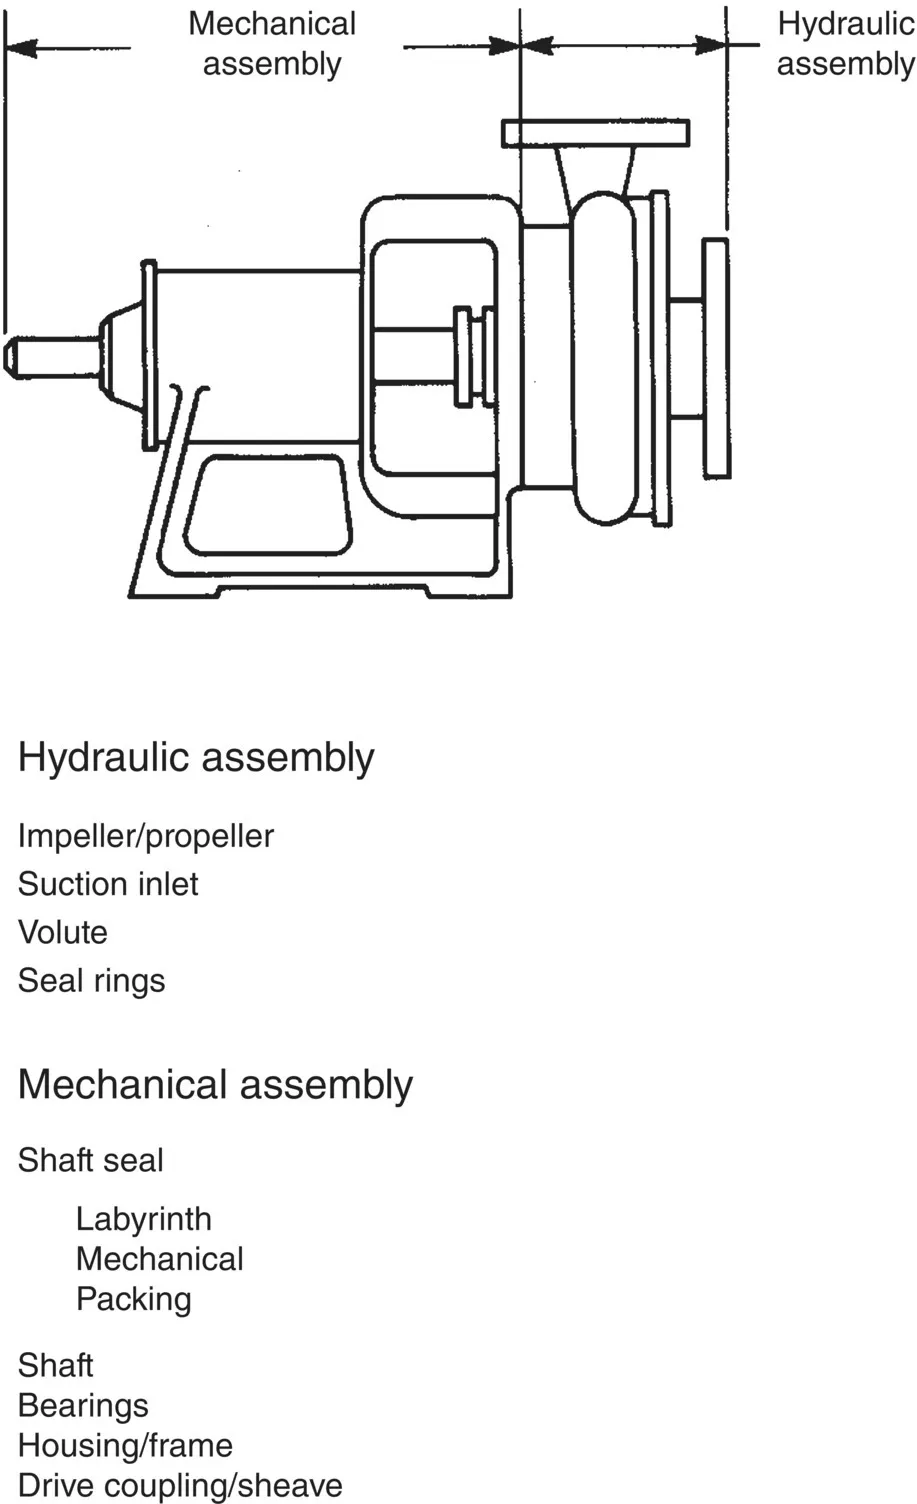 Schematic illustration of principal components of an elementary process pump.